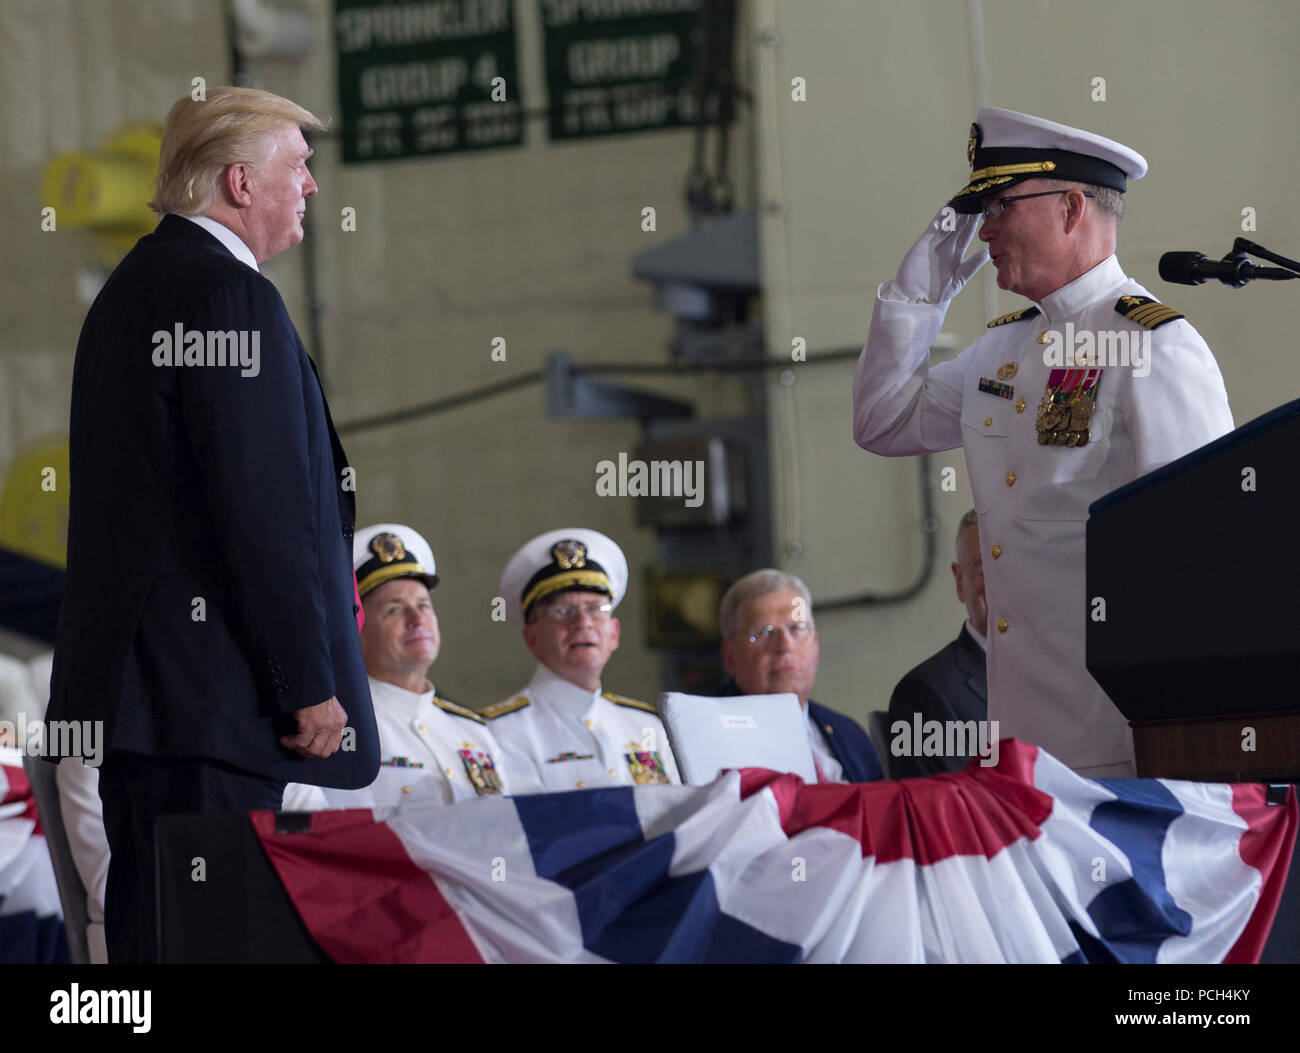 (July 22, 2017) Capt. Richard McCormack, commanding officer of the aircraft carrier USS Gerald R. Ford (CVN 78), salutes President Donald J. Trump as he assumes command during the ship's commissioning ceremony at Naval Station Norfolk, Va. Ford is the lead ship of the Ford-class aircraft carriers, and the first new U.S. aircraft carrier design in 40 years. Stock Photo